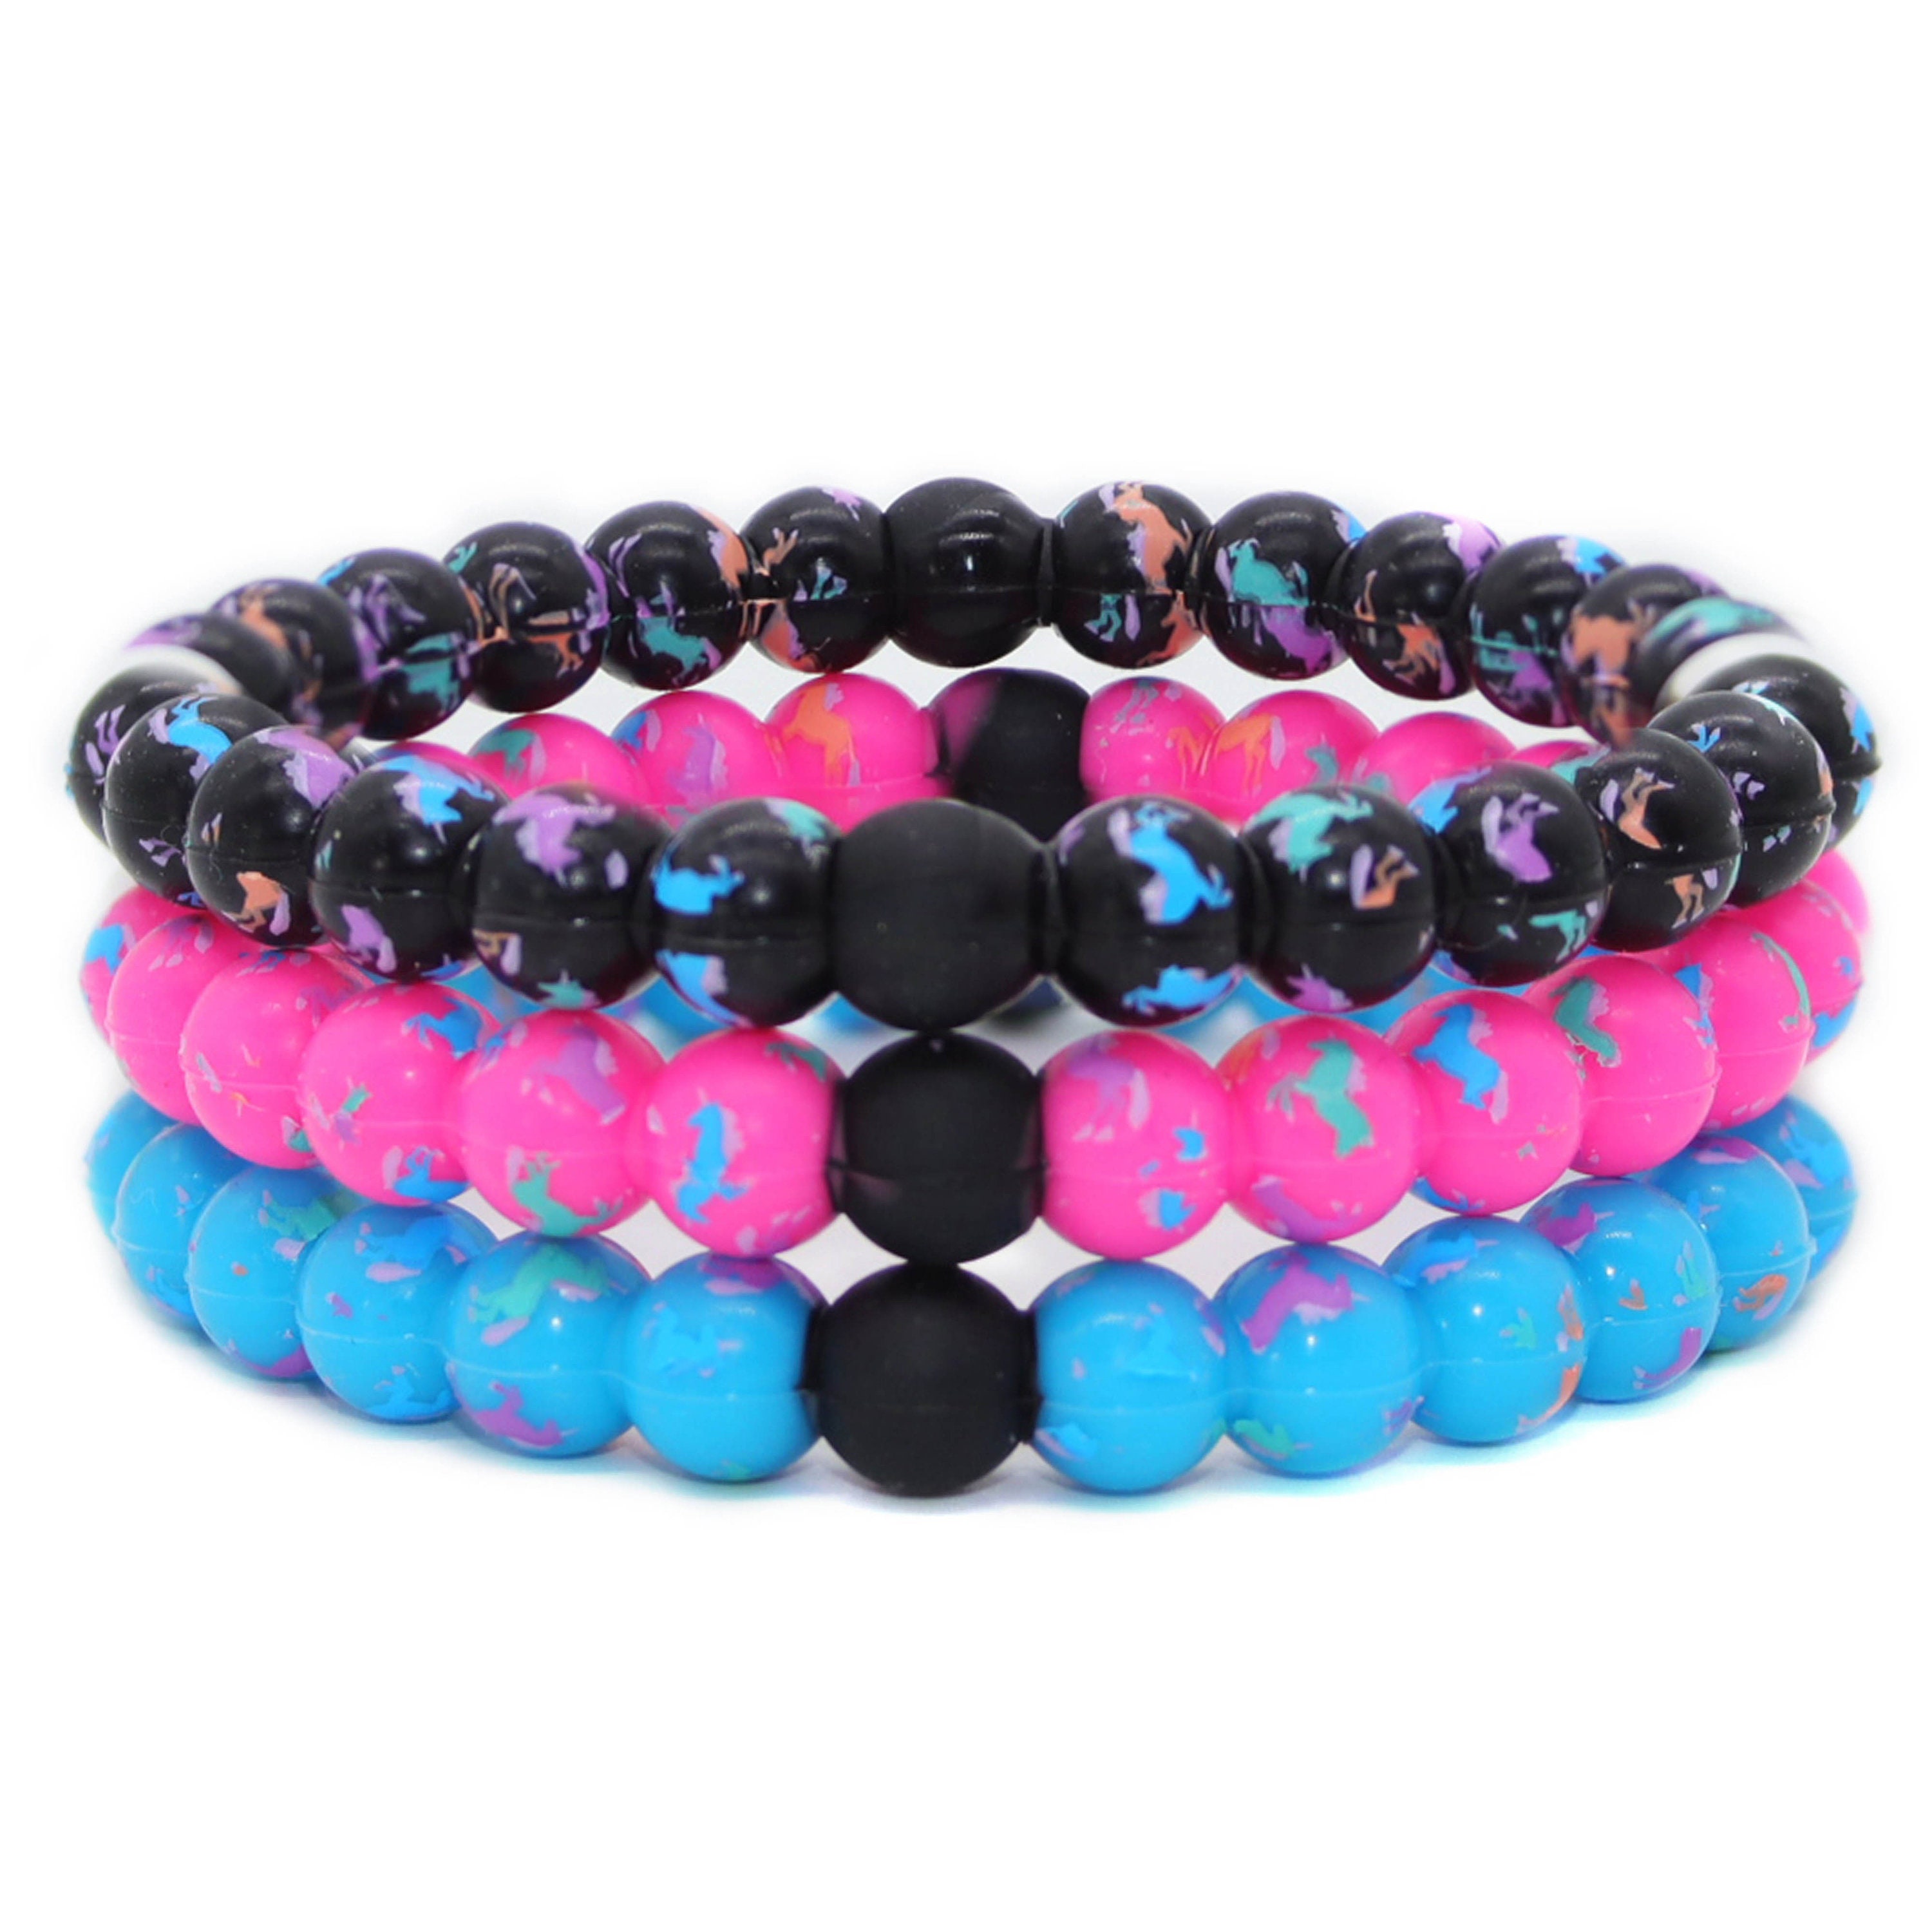 Zodaca 8 Pack Color Changing Cute Bracelets - Silicone Beaded Bracelets  Jewelry Set for Kids, Teen Girls, Women (2.6x0.3 in)